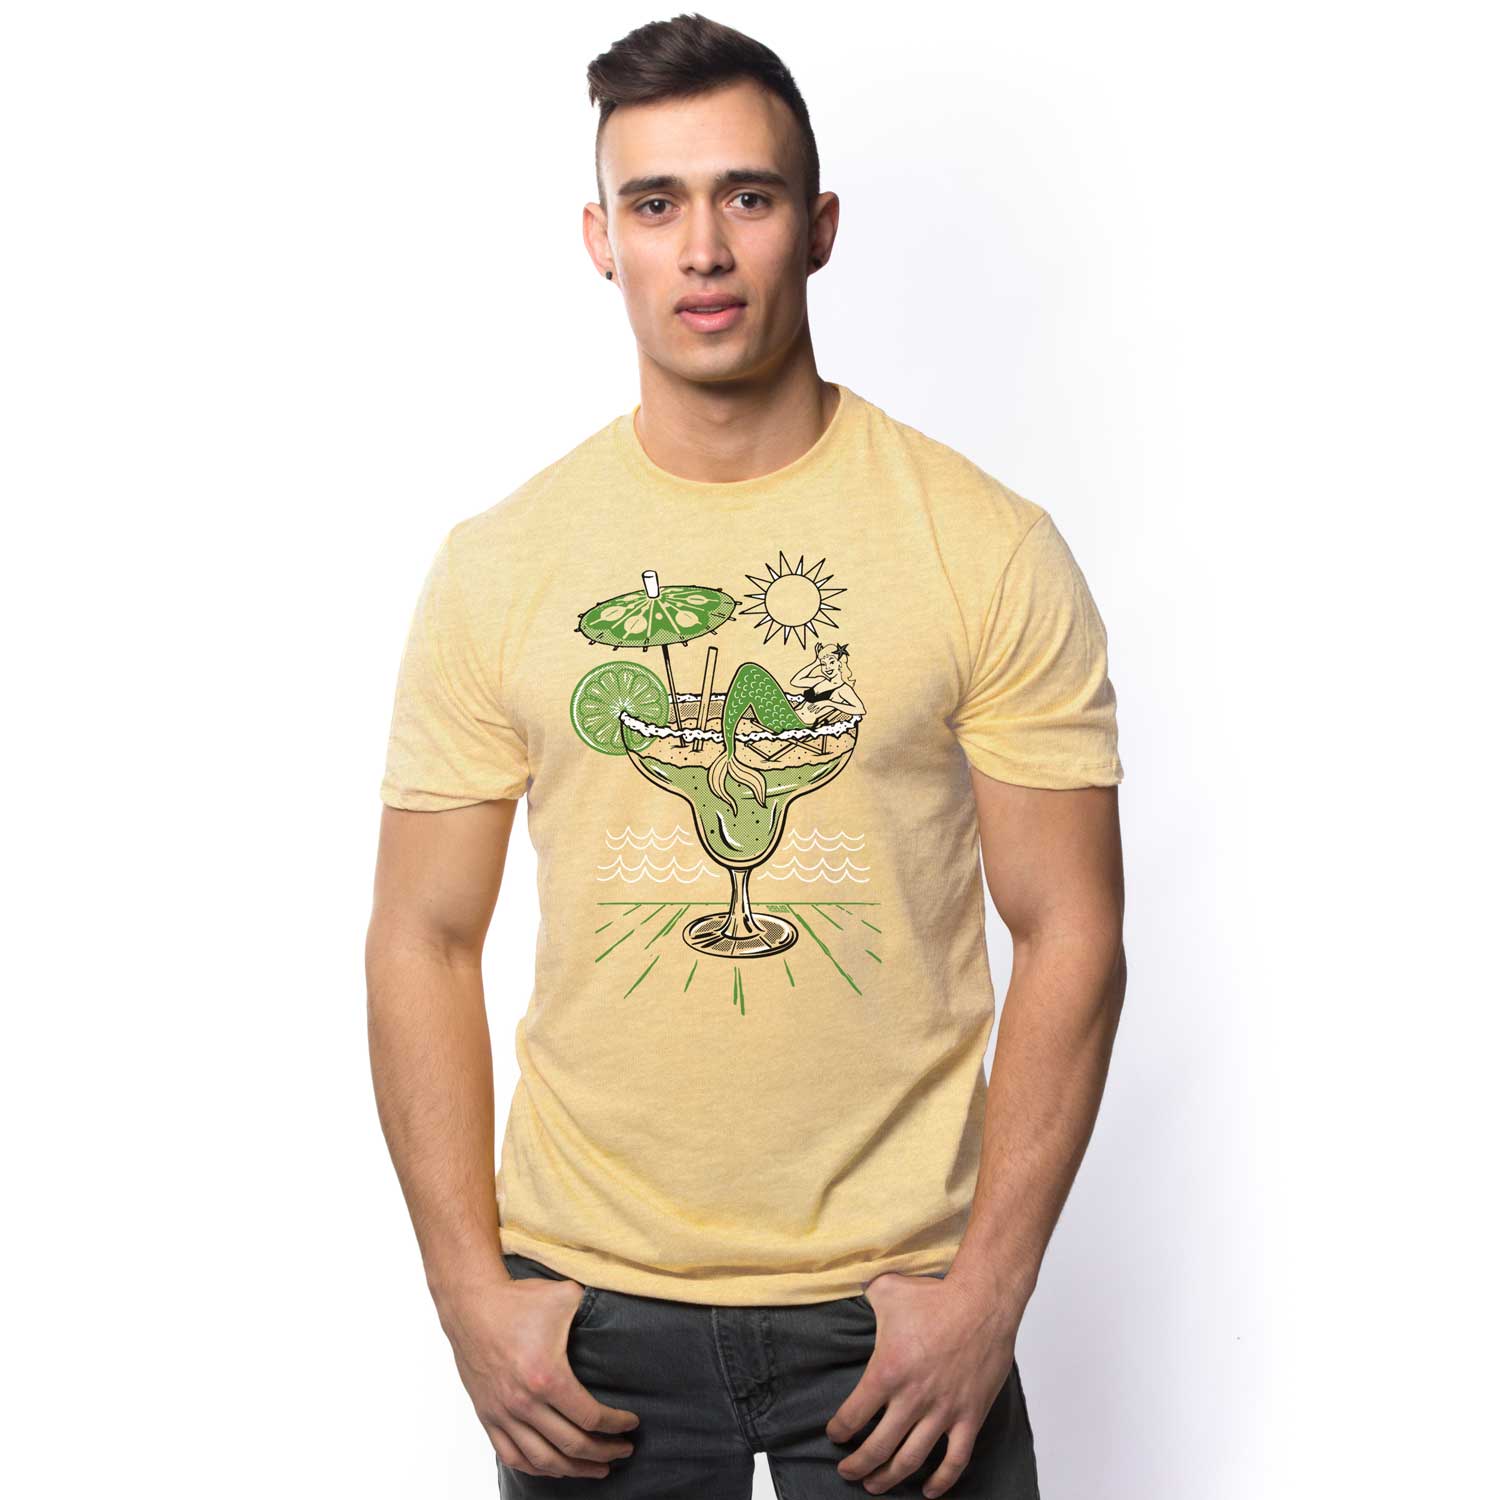 Cool Vintage & Retro T-shirts  SOLID THREADS Best Selling Tees